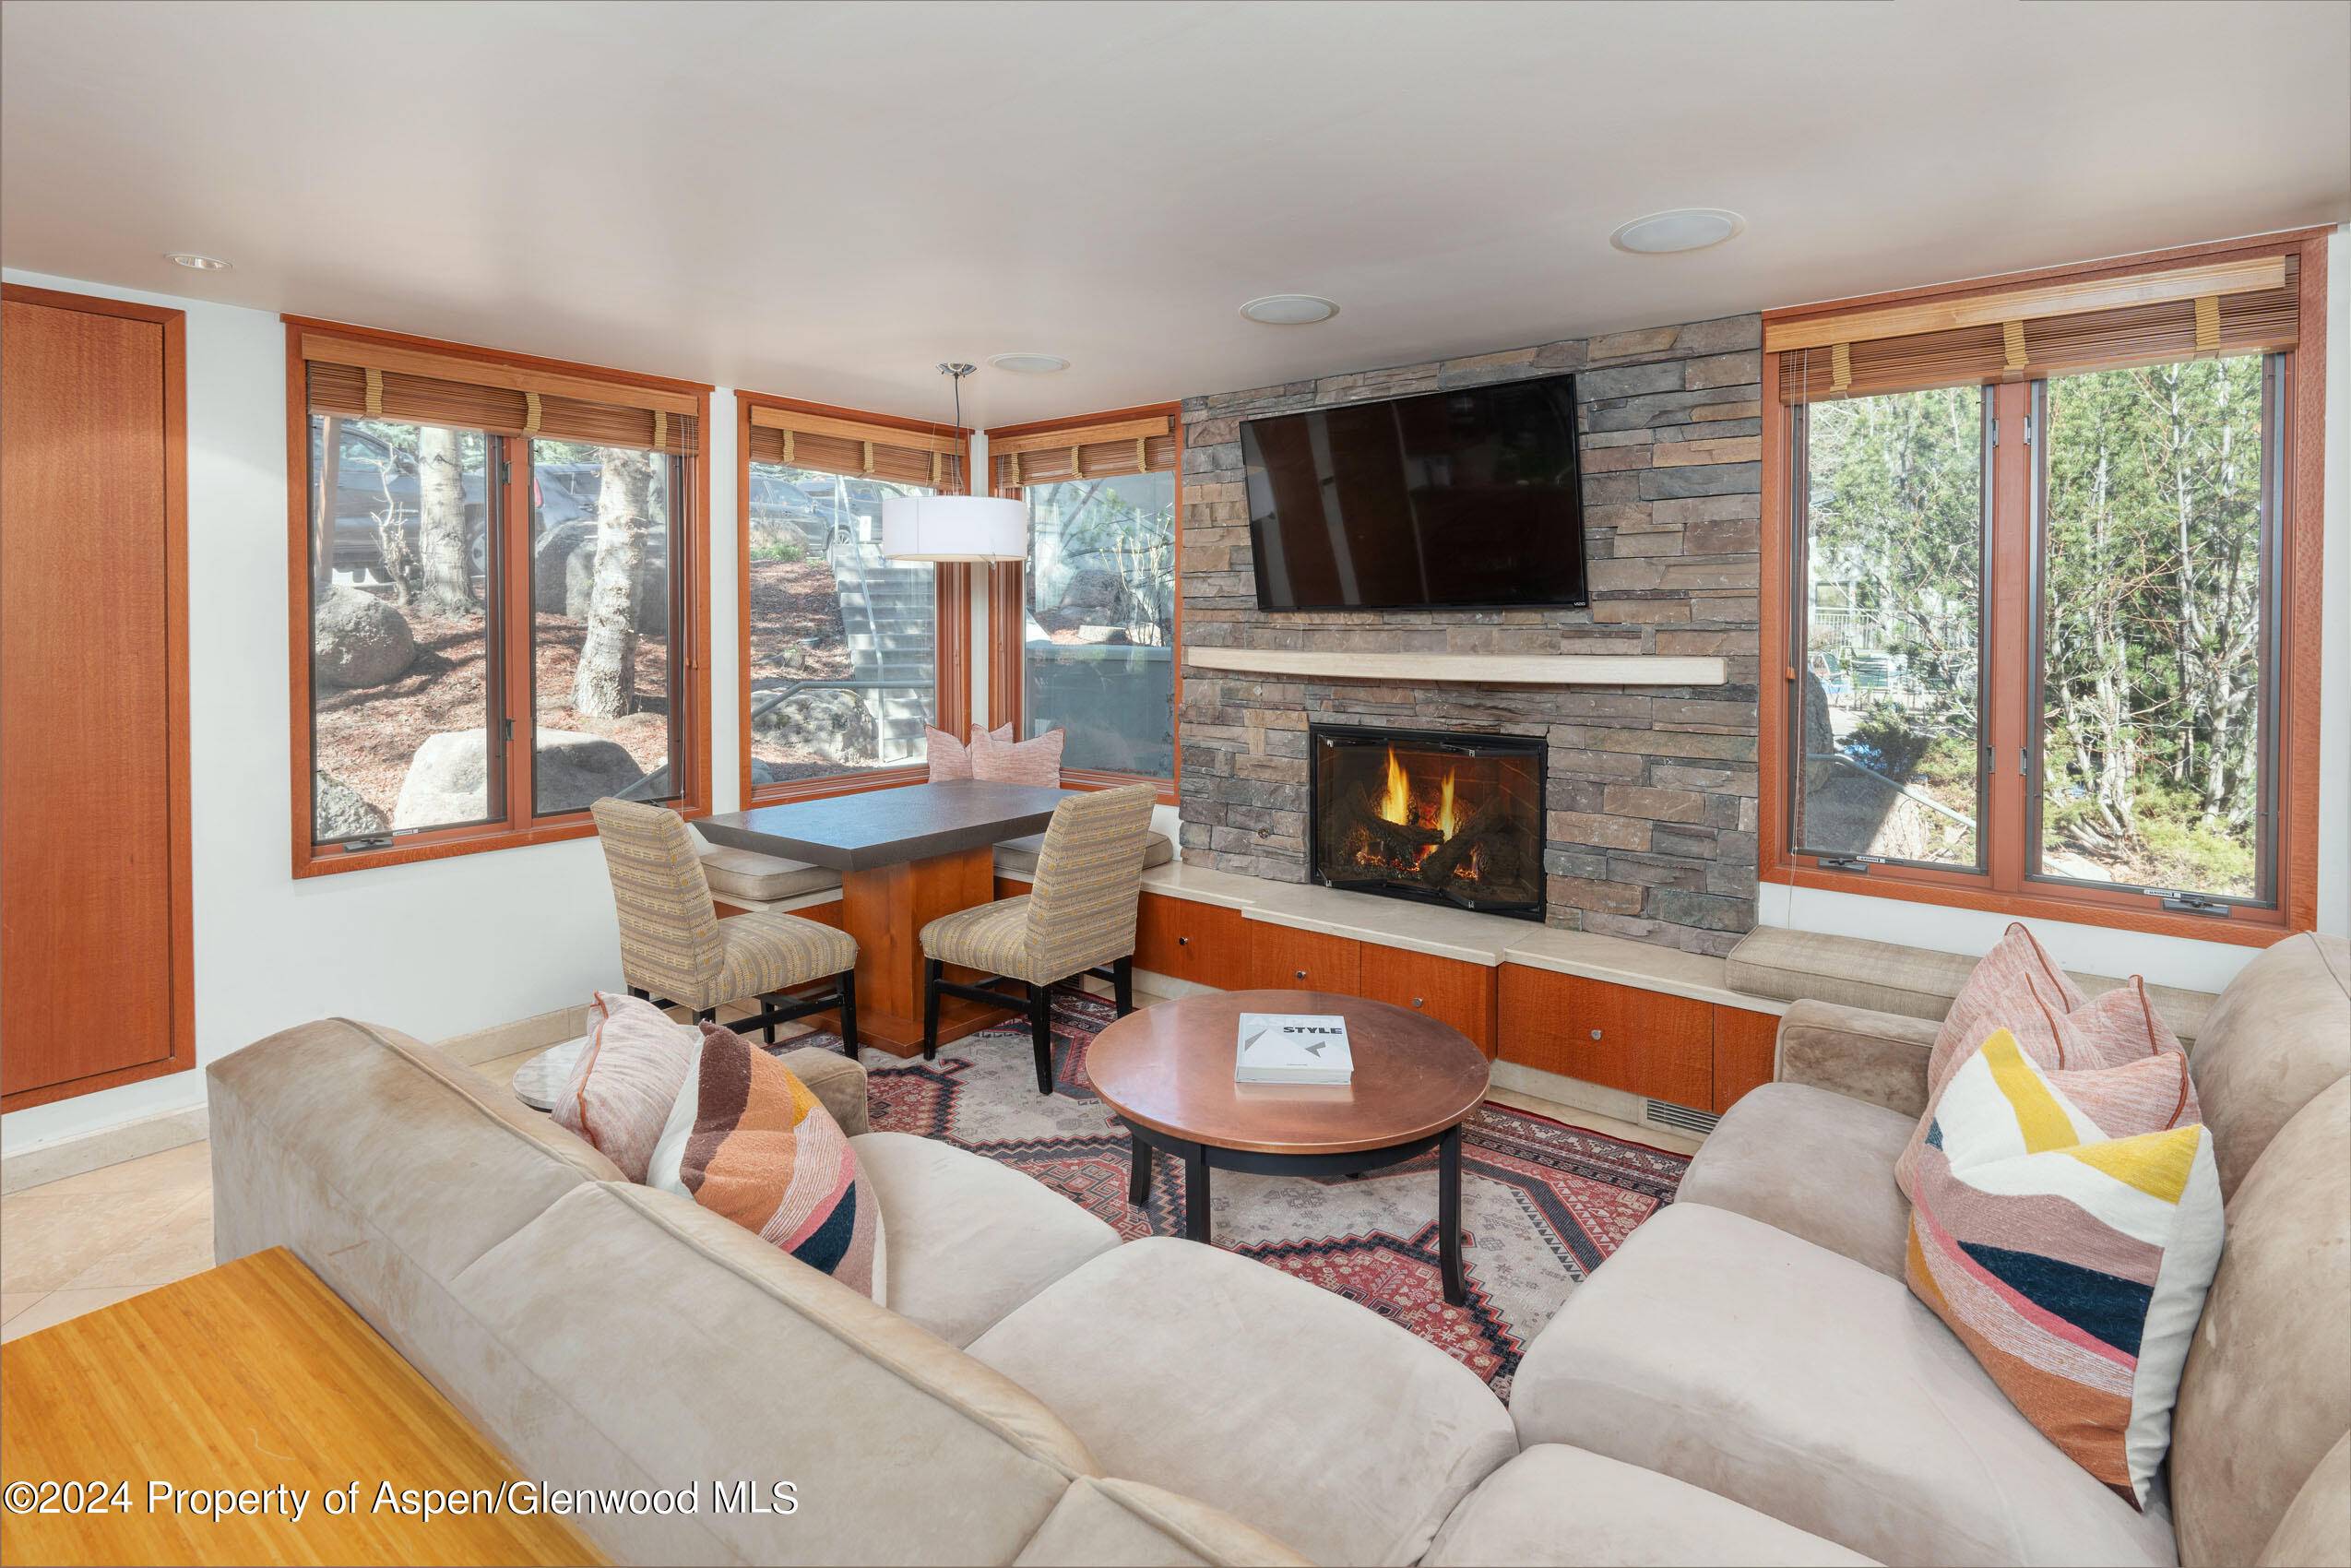 Located just steps away from the Tree House and Snowmass Base Village Plaza, this fully furnished Tamarack unit is turn key ready !